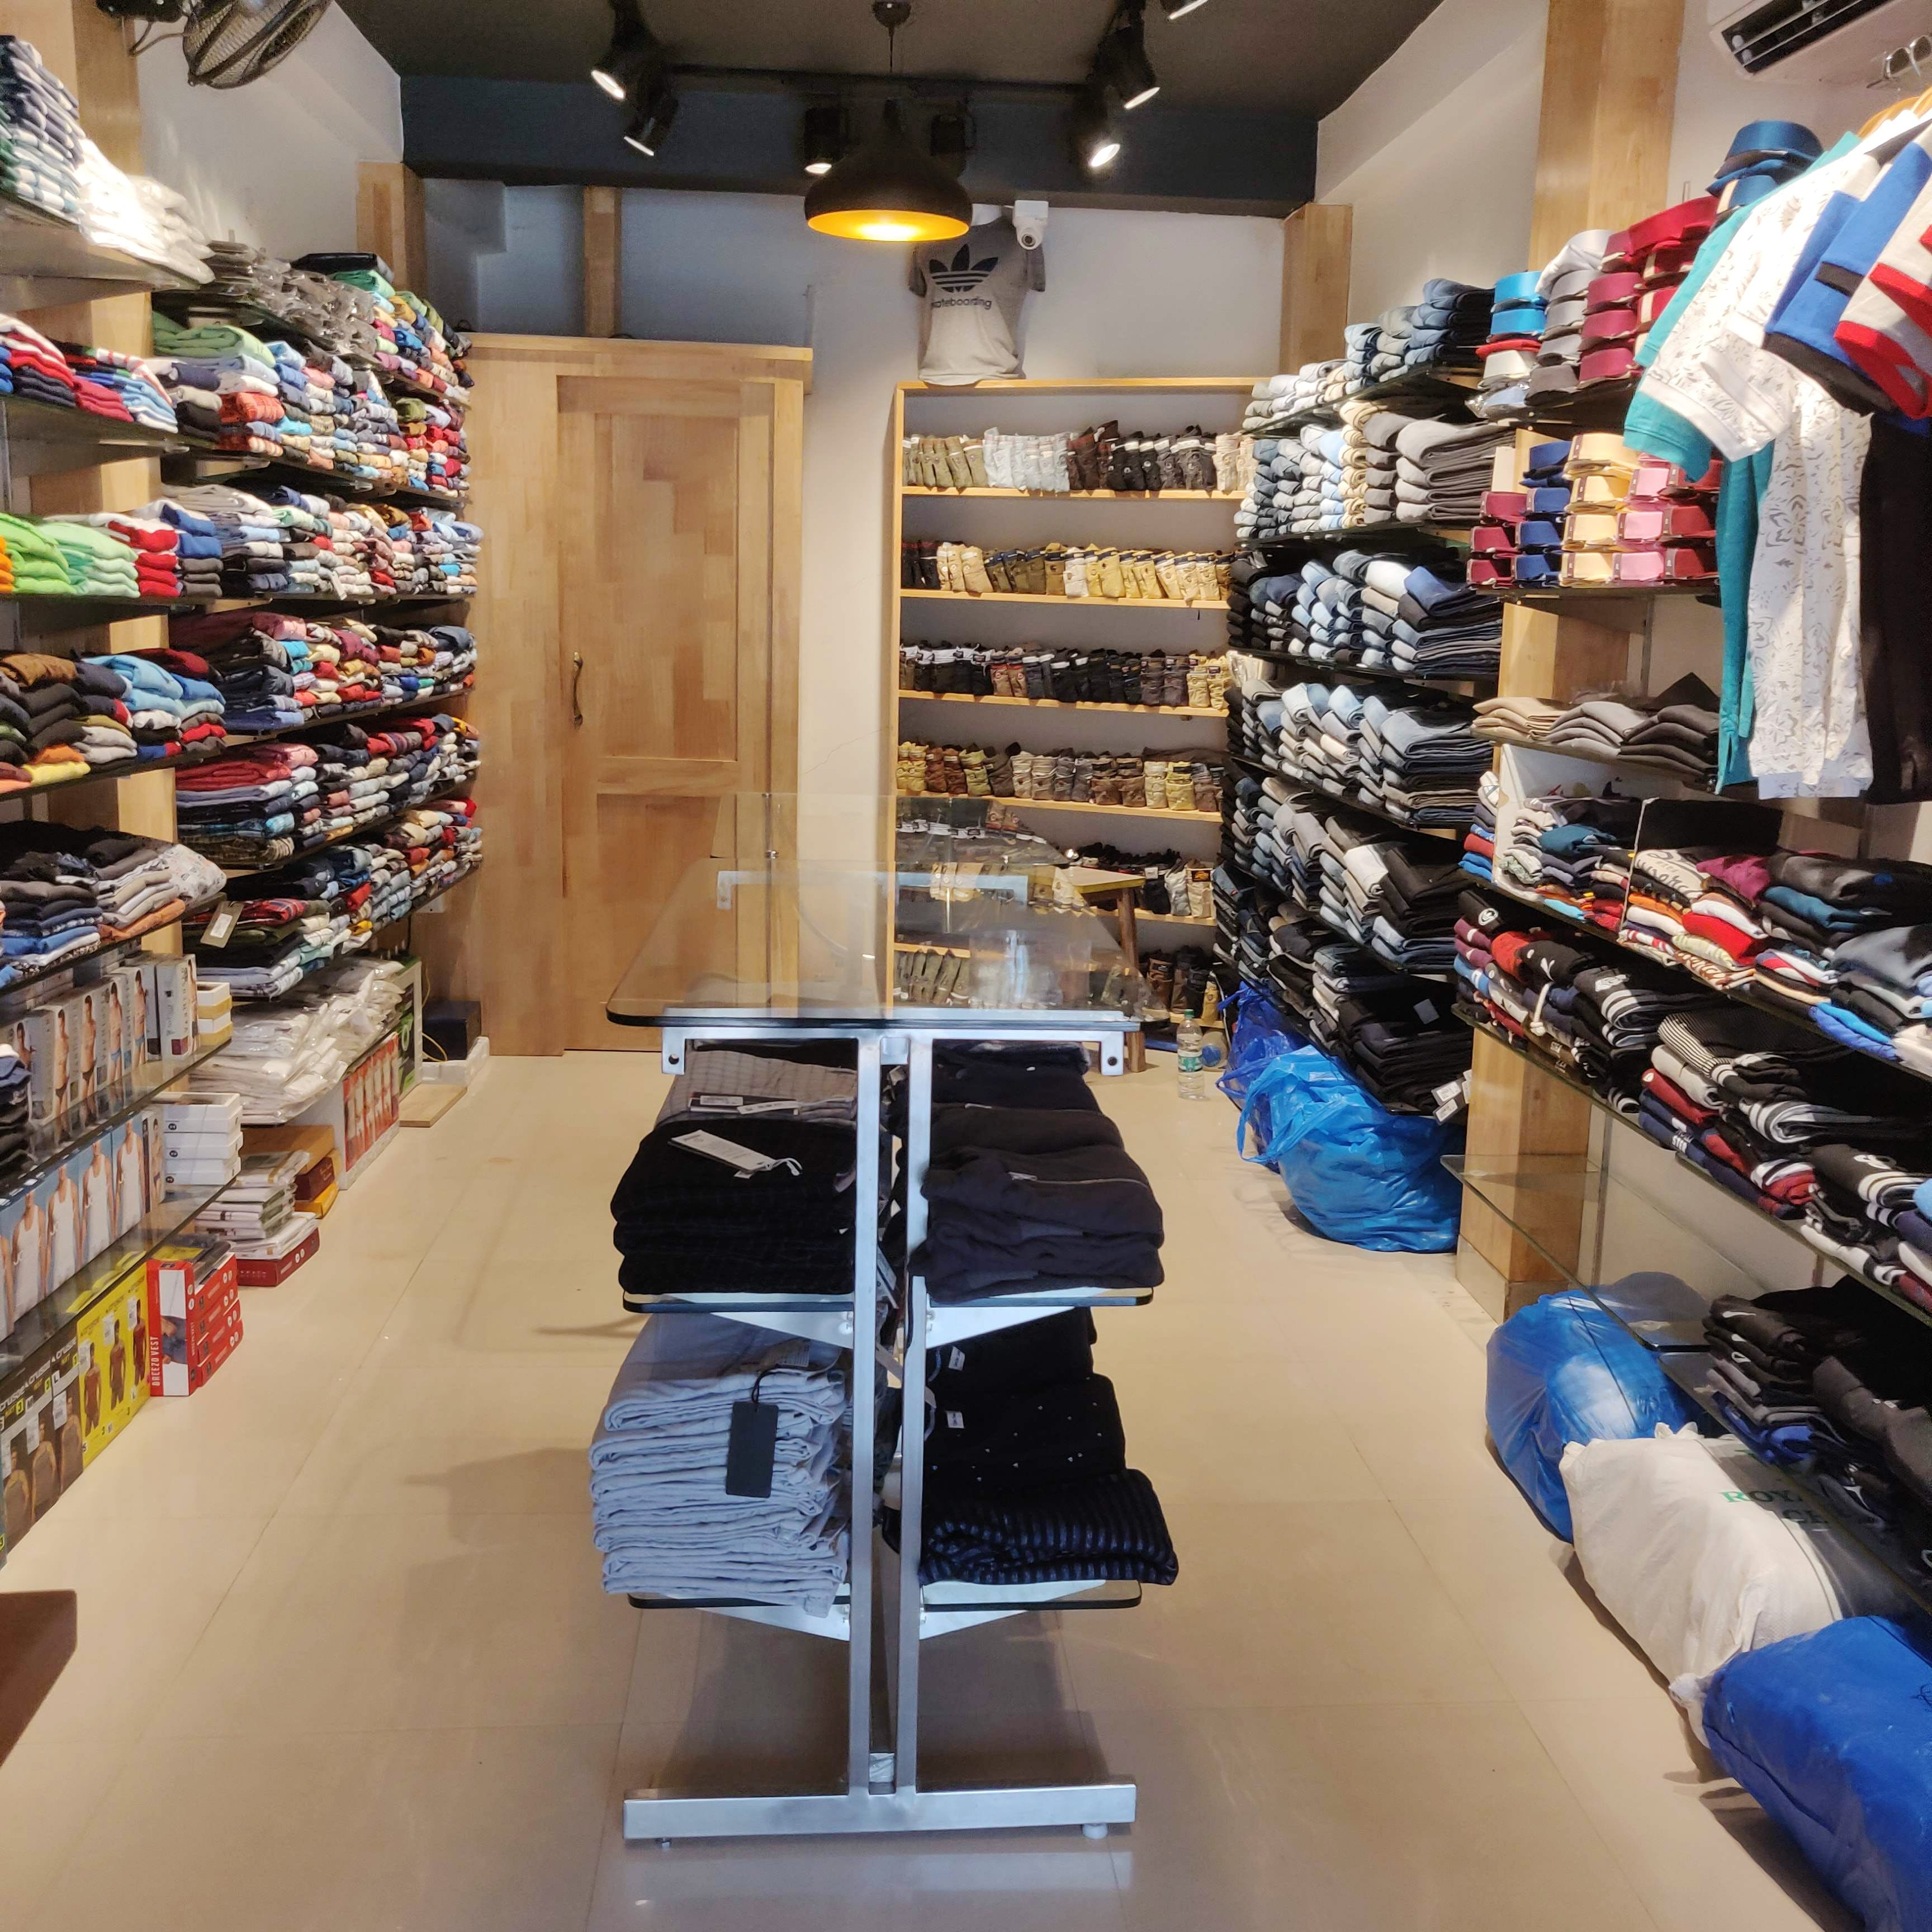 Outlet store,Retail,Building,Footwear,Aisle,Boutique,Inventory,Room,Shopping,Shoe